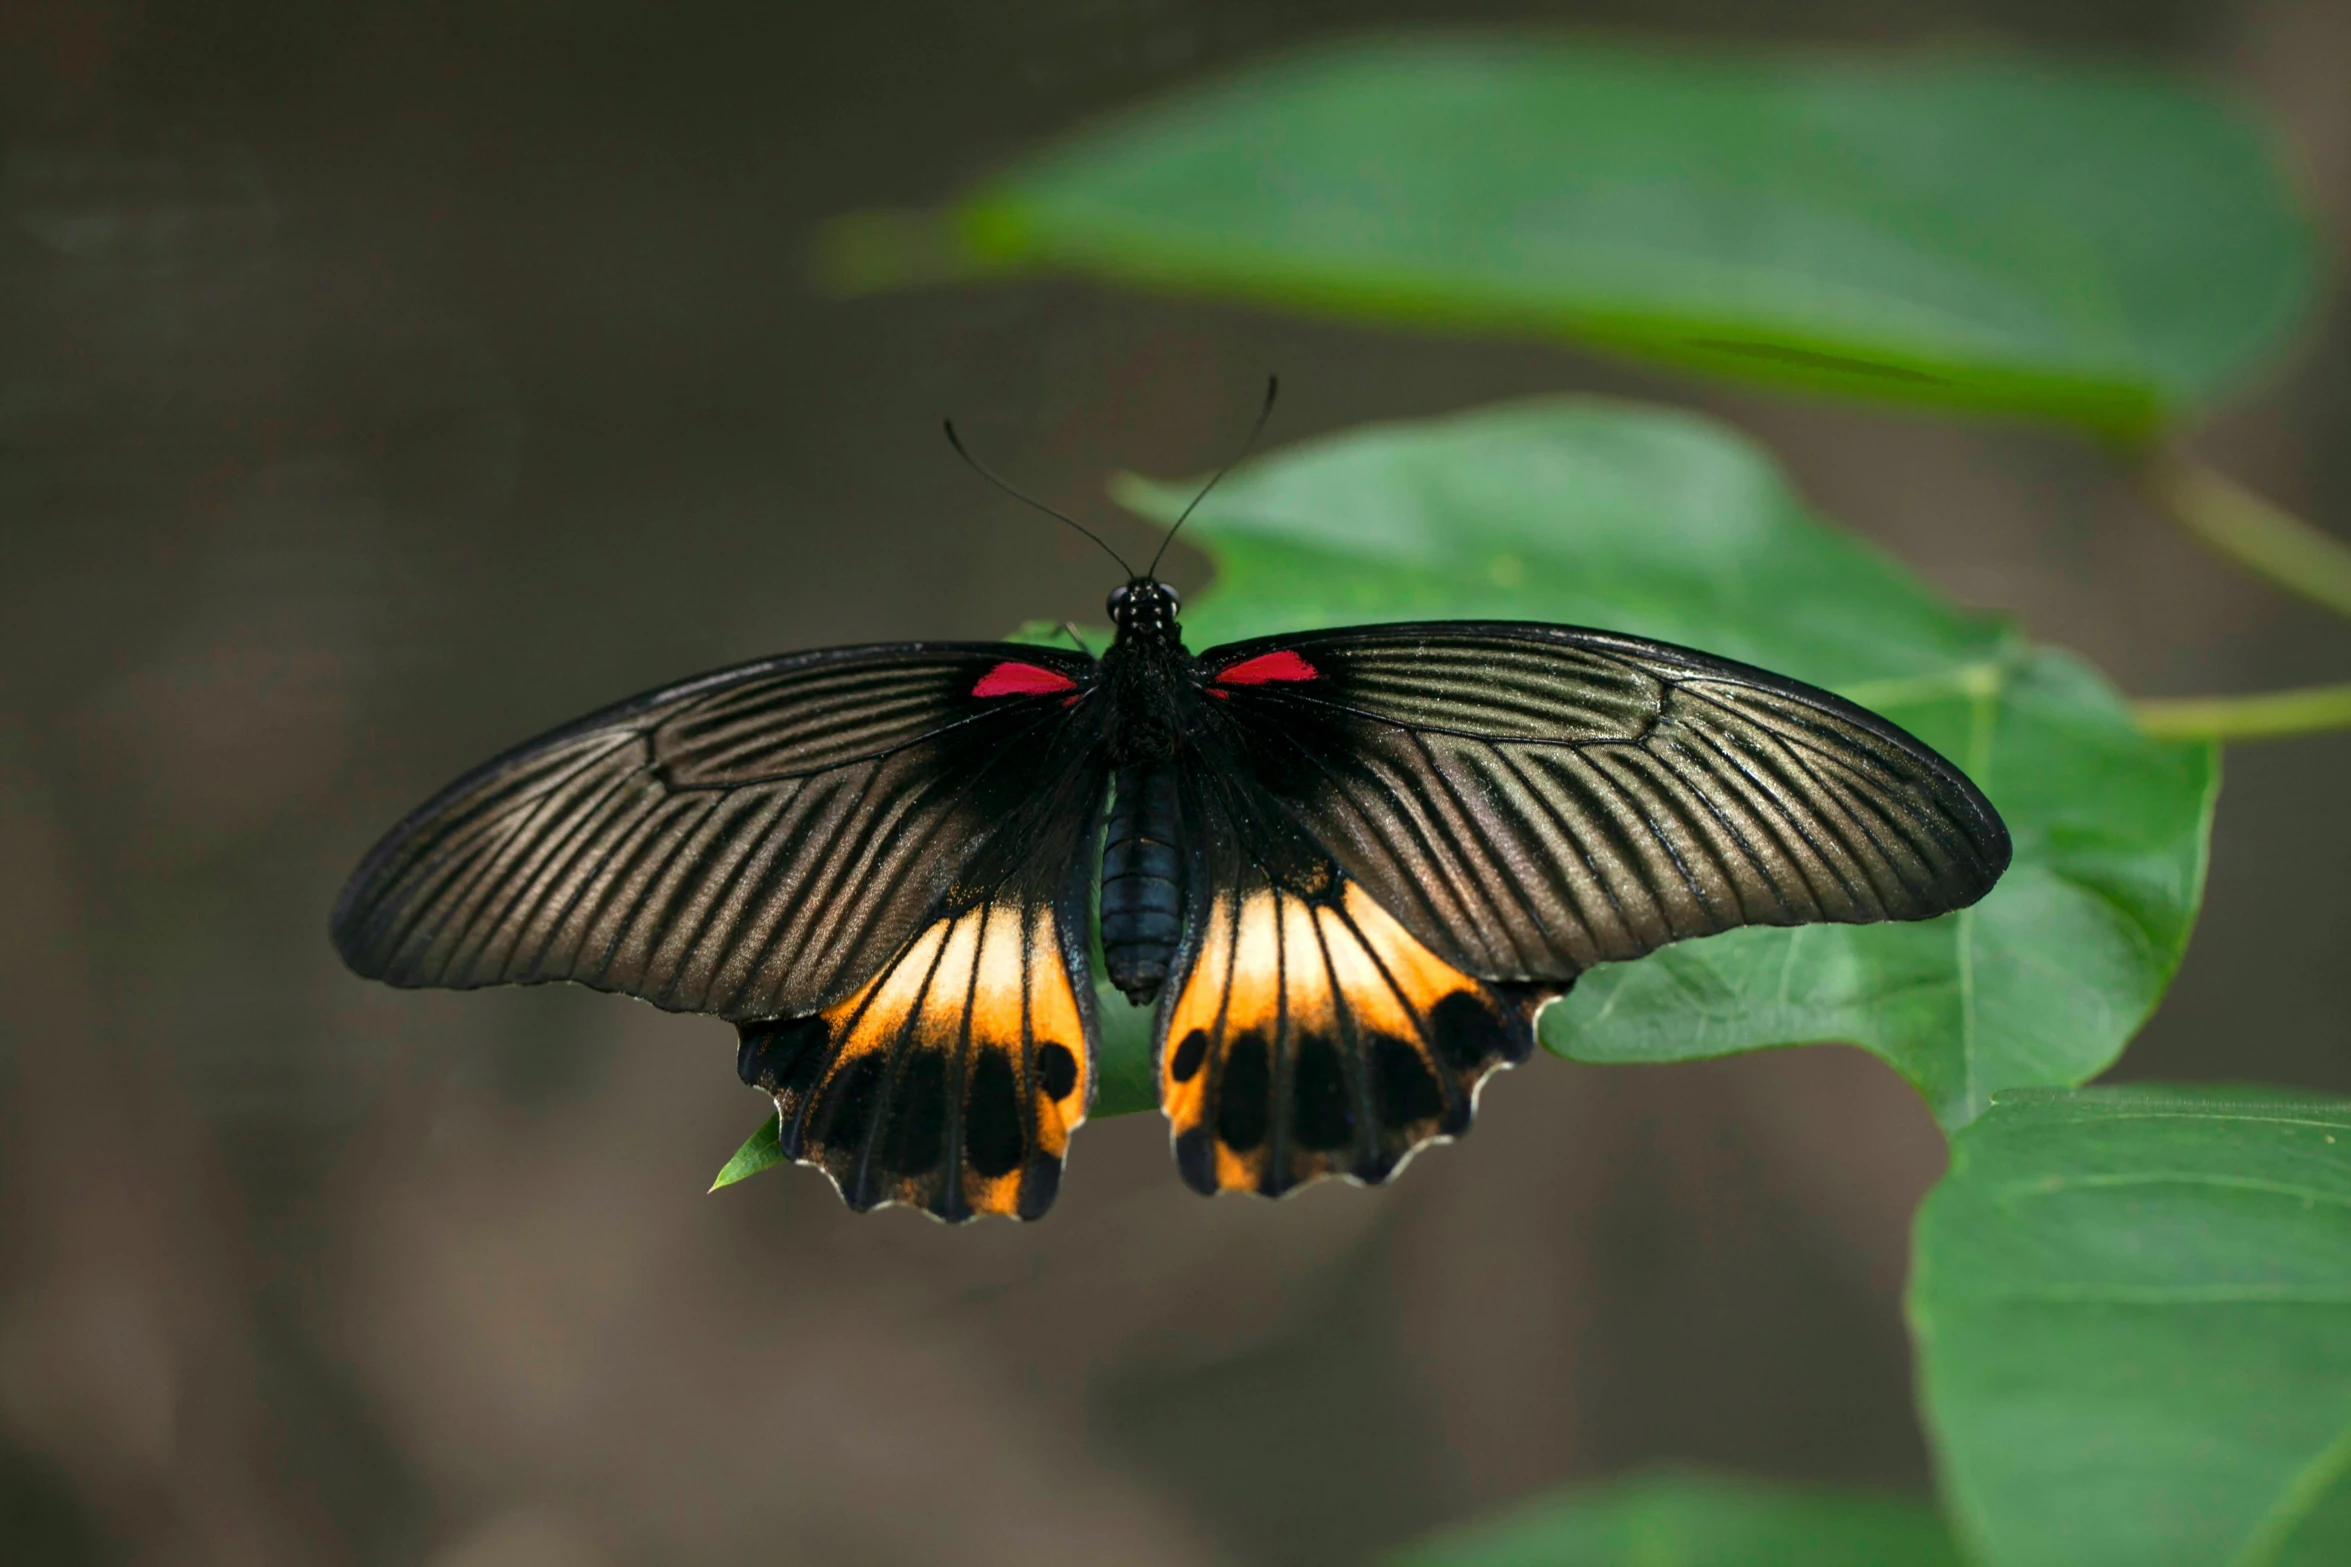 a black erfly with yellow accents rests on a leaf